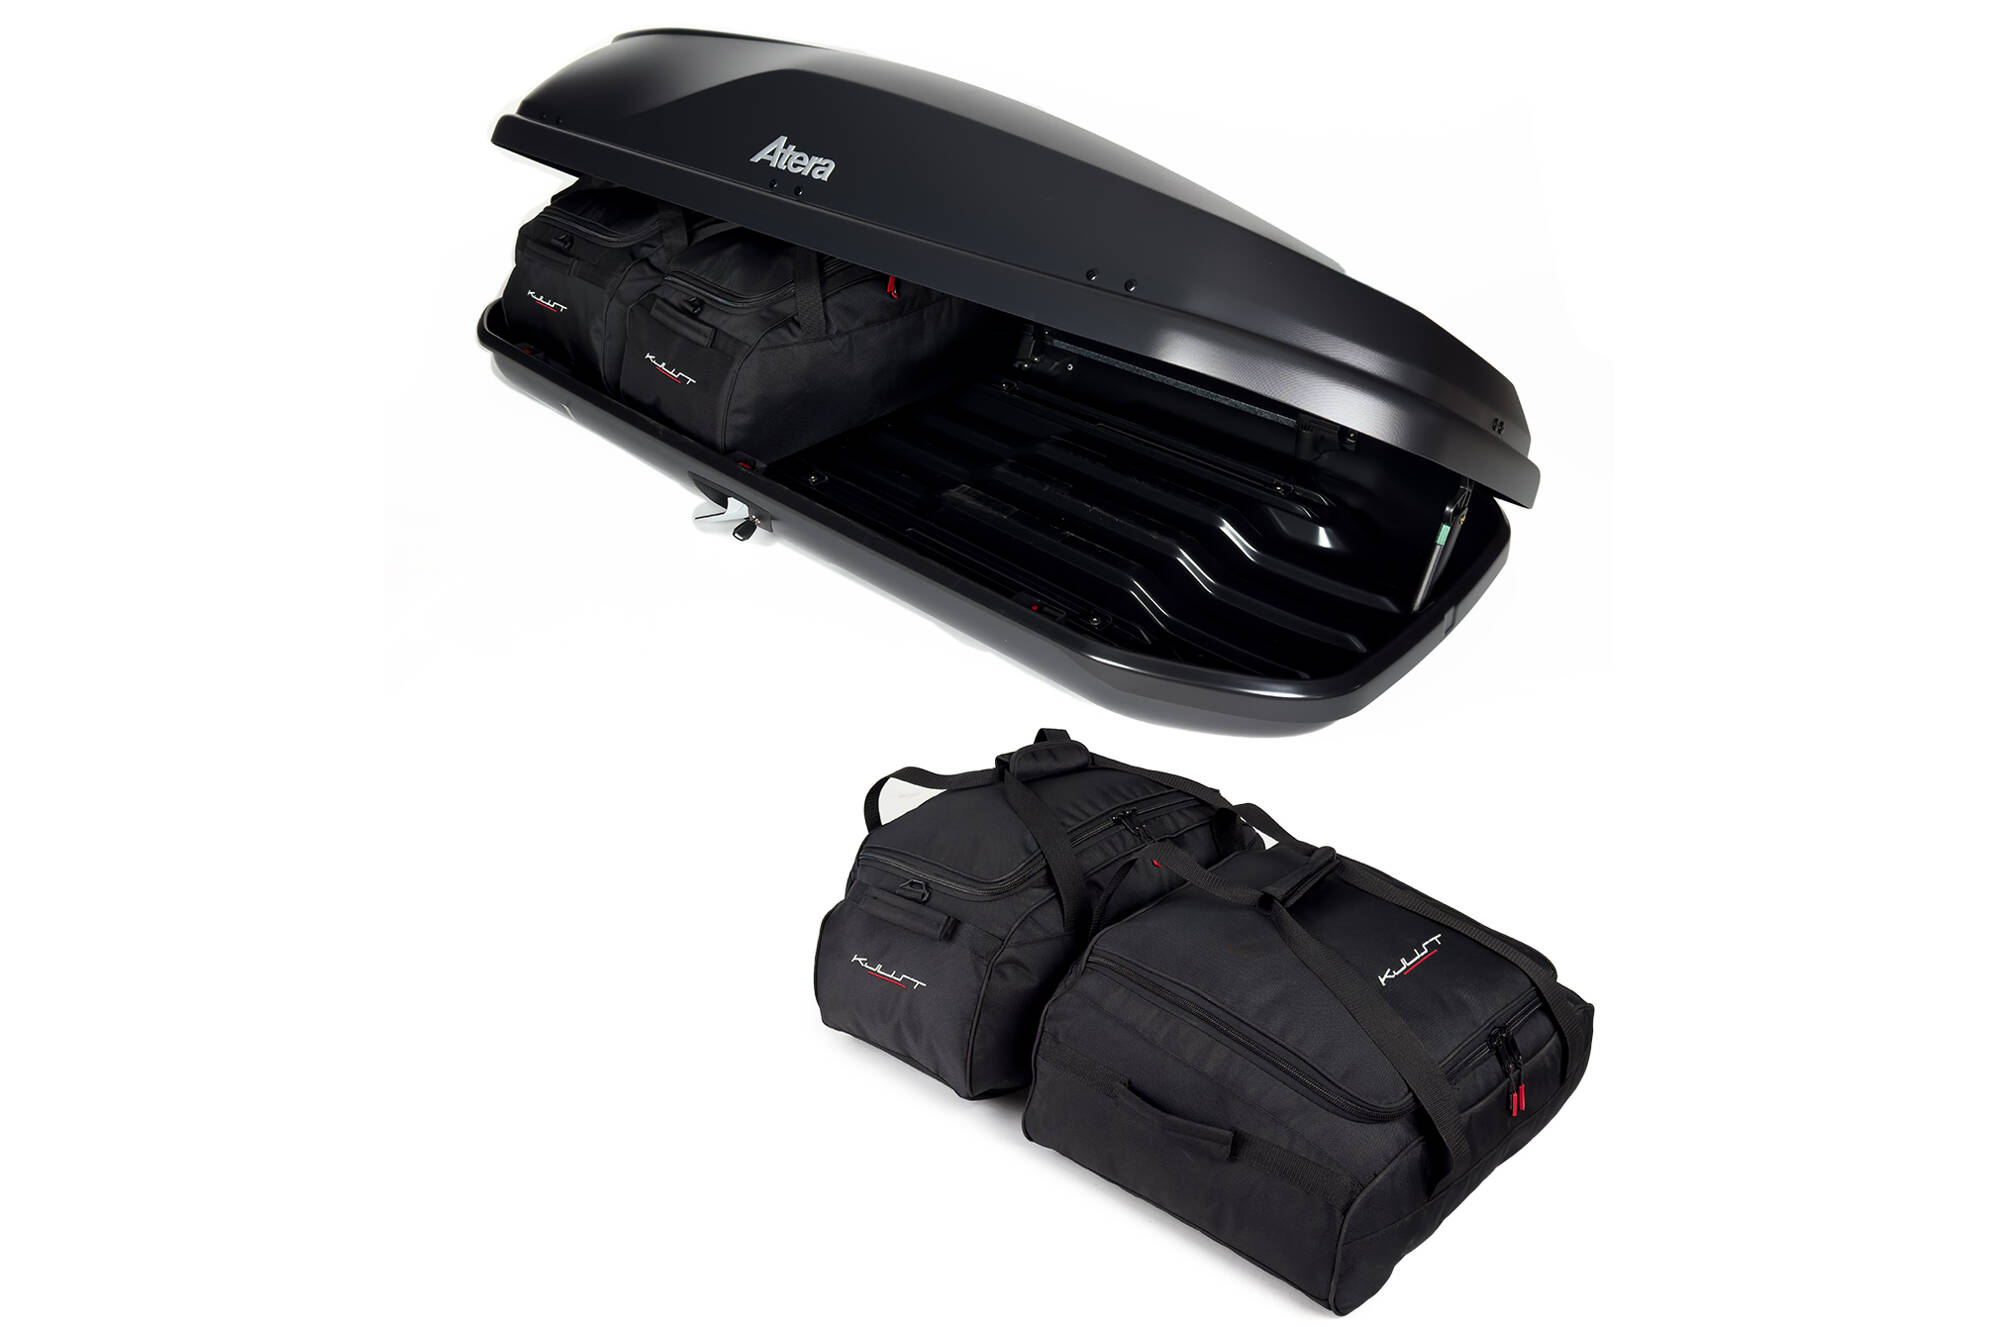 https://www.carfitbags.com/eng_pl_Roof-Box-KJUST-Bags-Set-4pcs-Compatible-with-ATERA-CASAR-L-5533_5.jpg